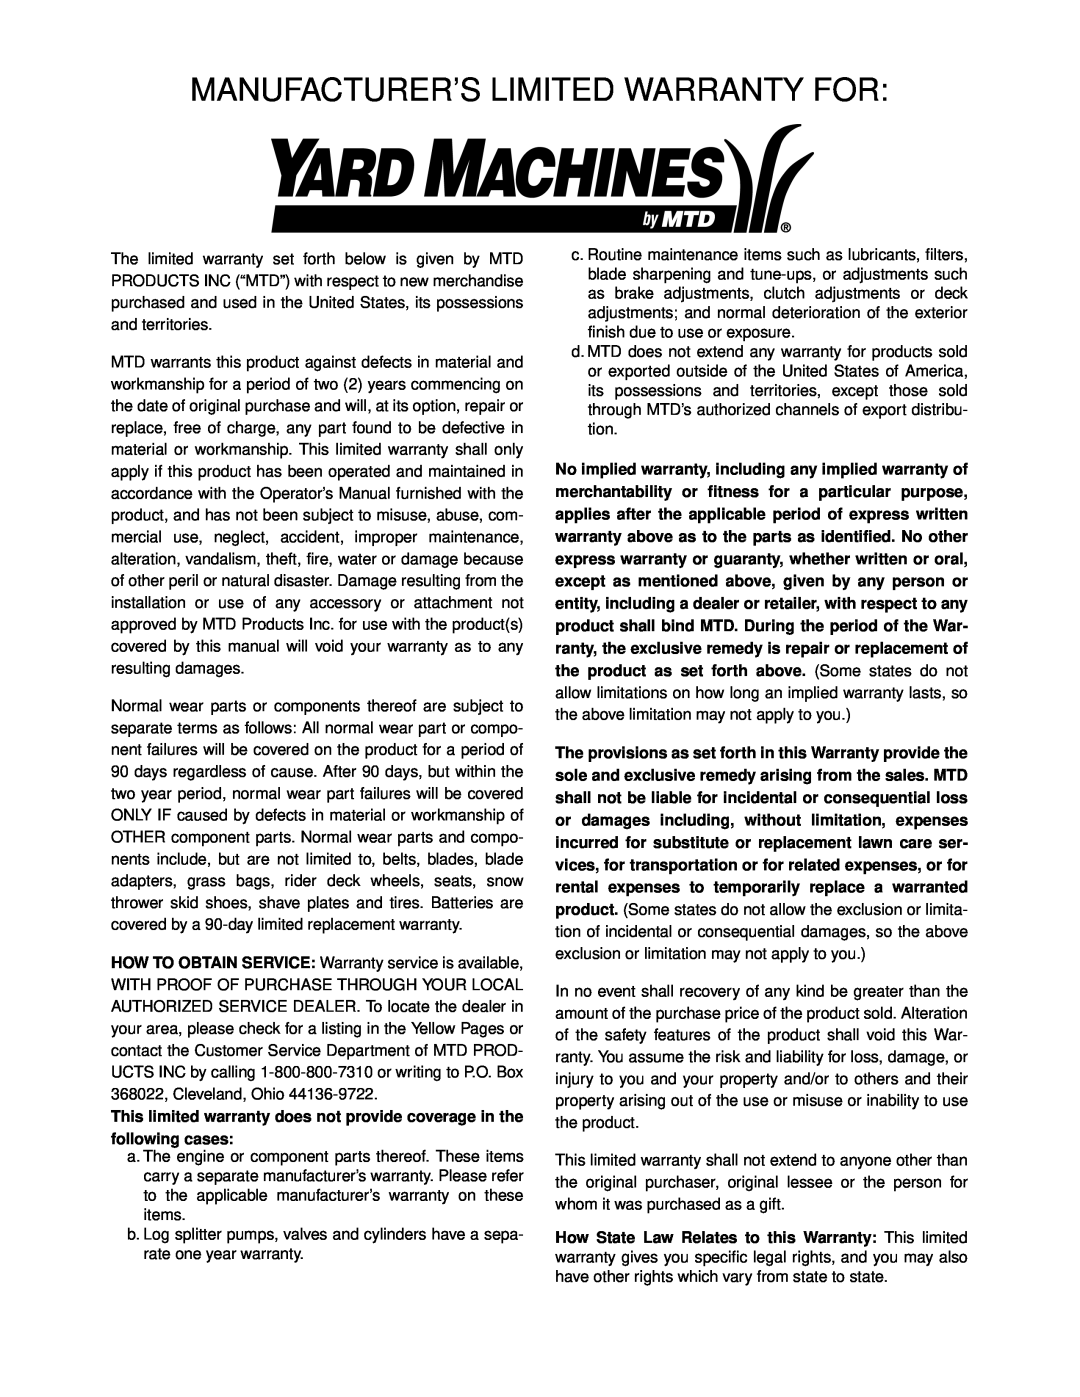 Yard Machines 429 manual Manufacturer’S Limited Warranty For 